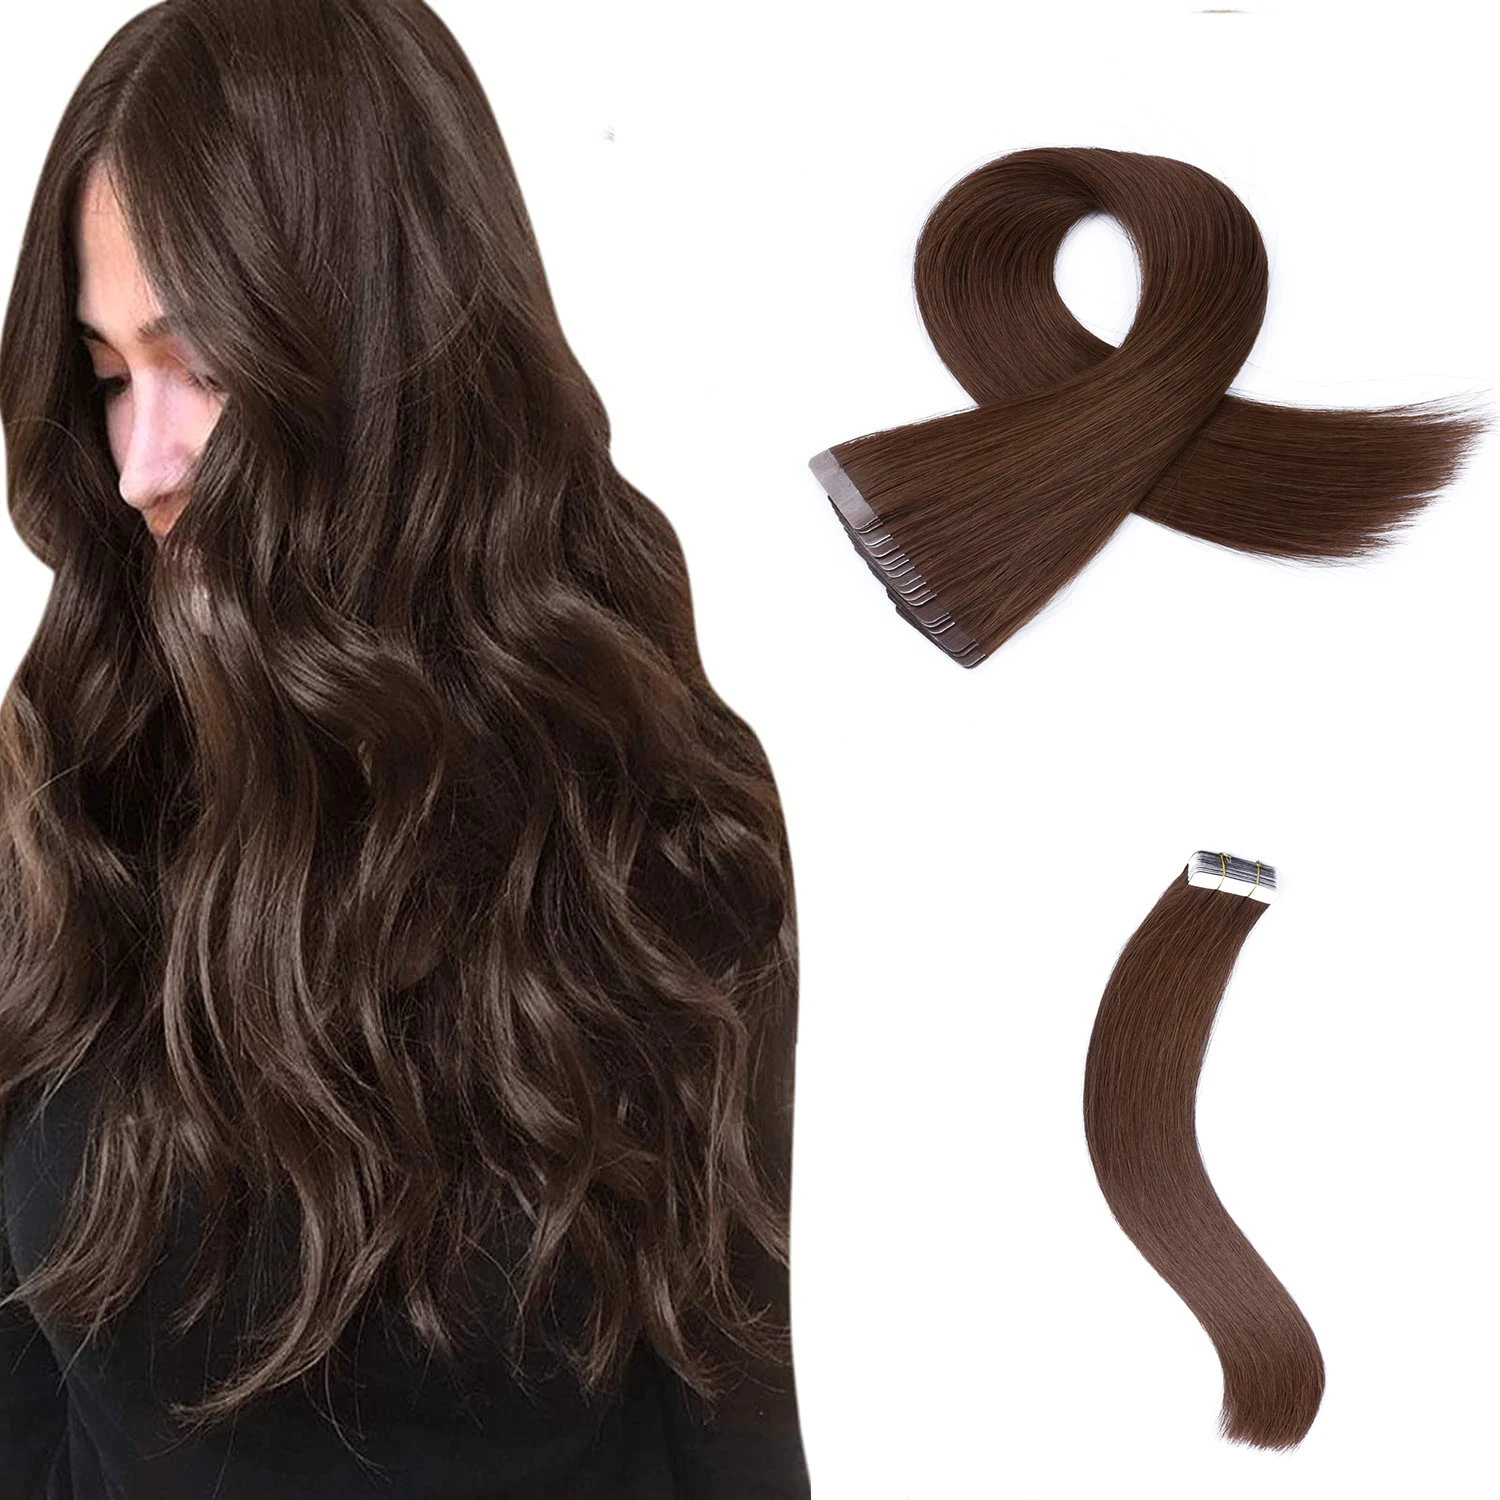 Brown Natural Tape In Human Hair Extensions Skin Weft Hair Extensions Adhesive Invisible Real Silky Straight For Black Women